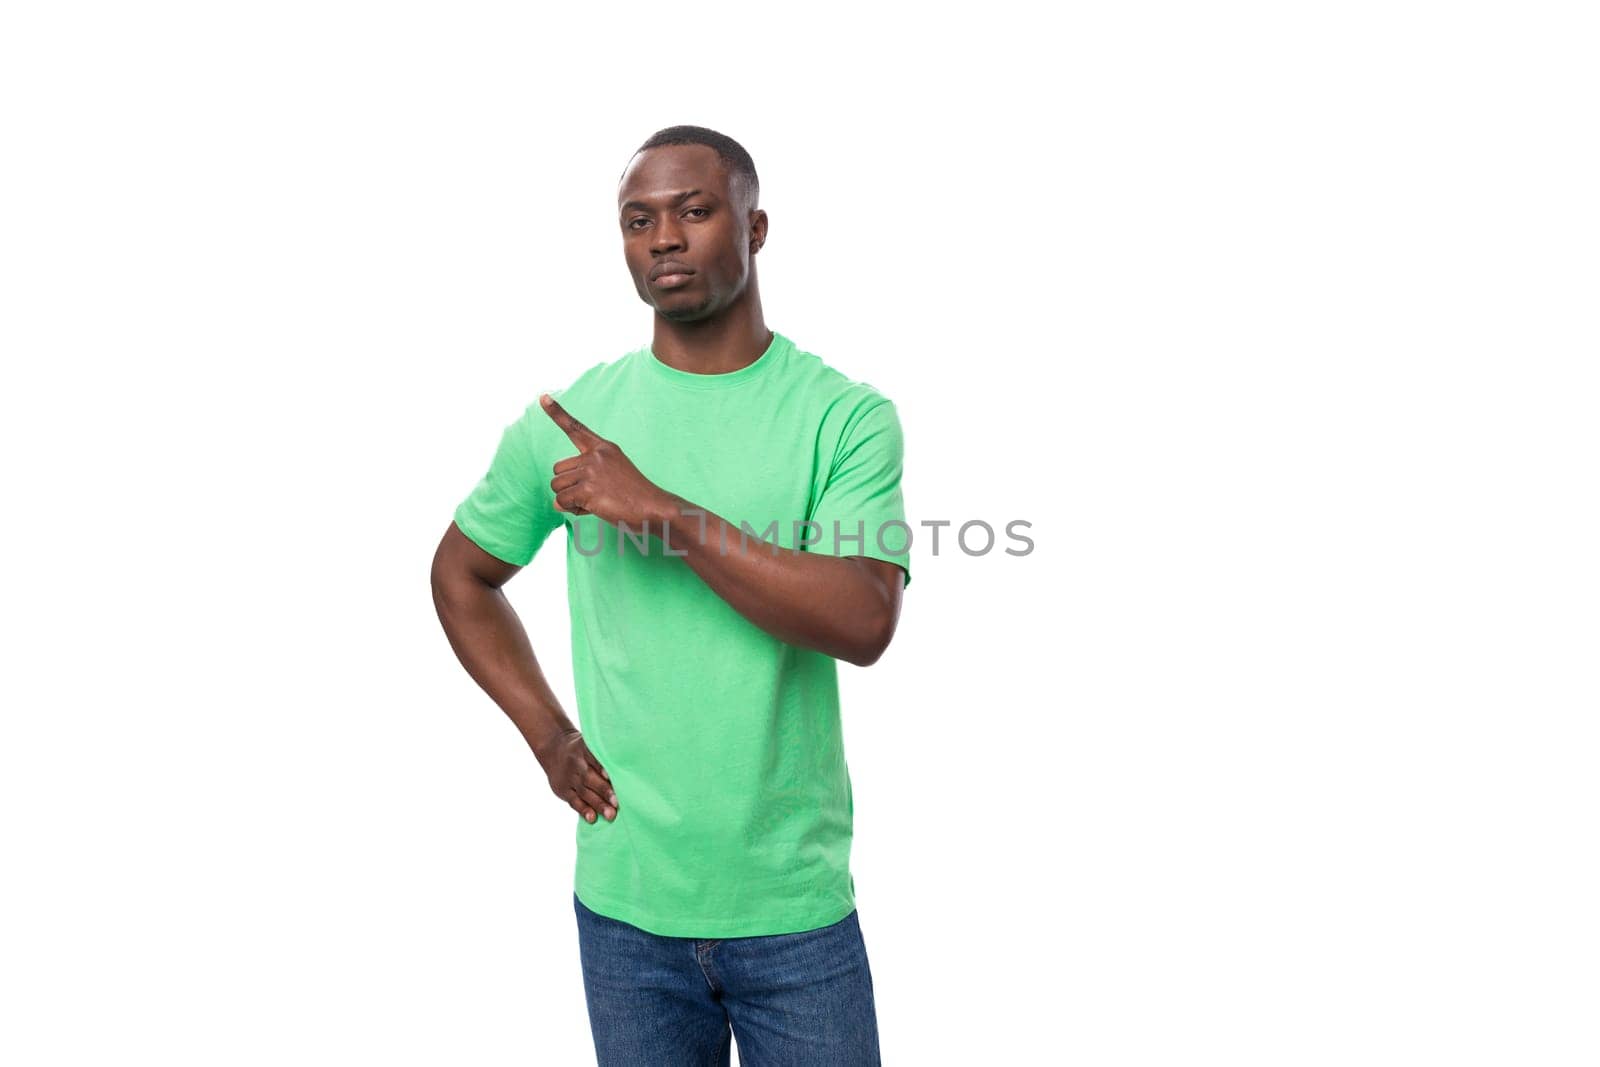 young handsome african man in light green t-shirt and jeans tells interesting news by TRMK